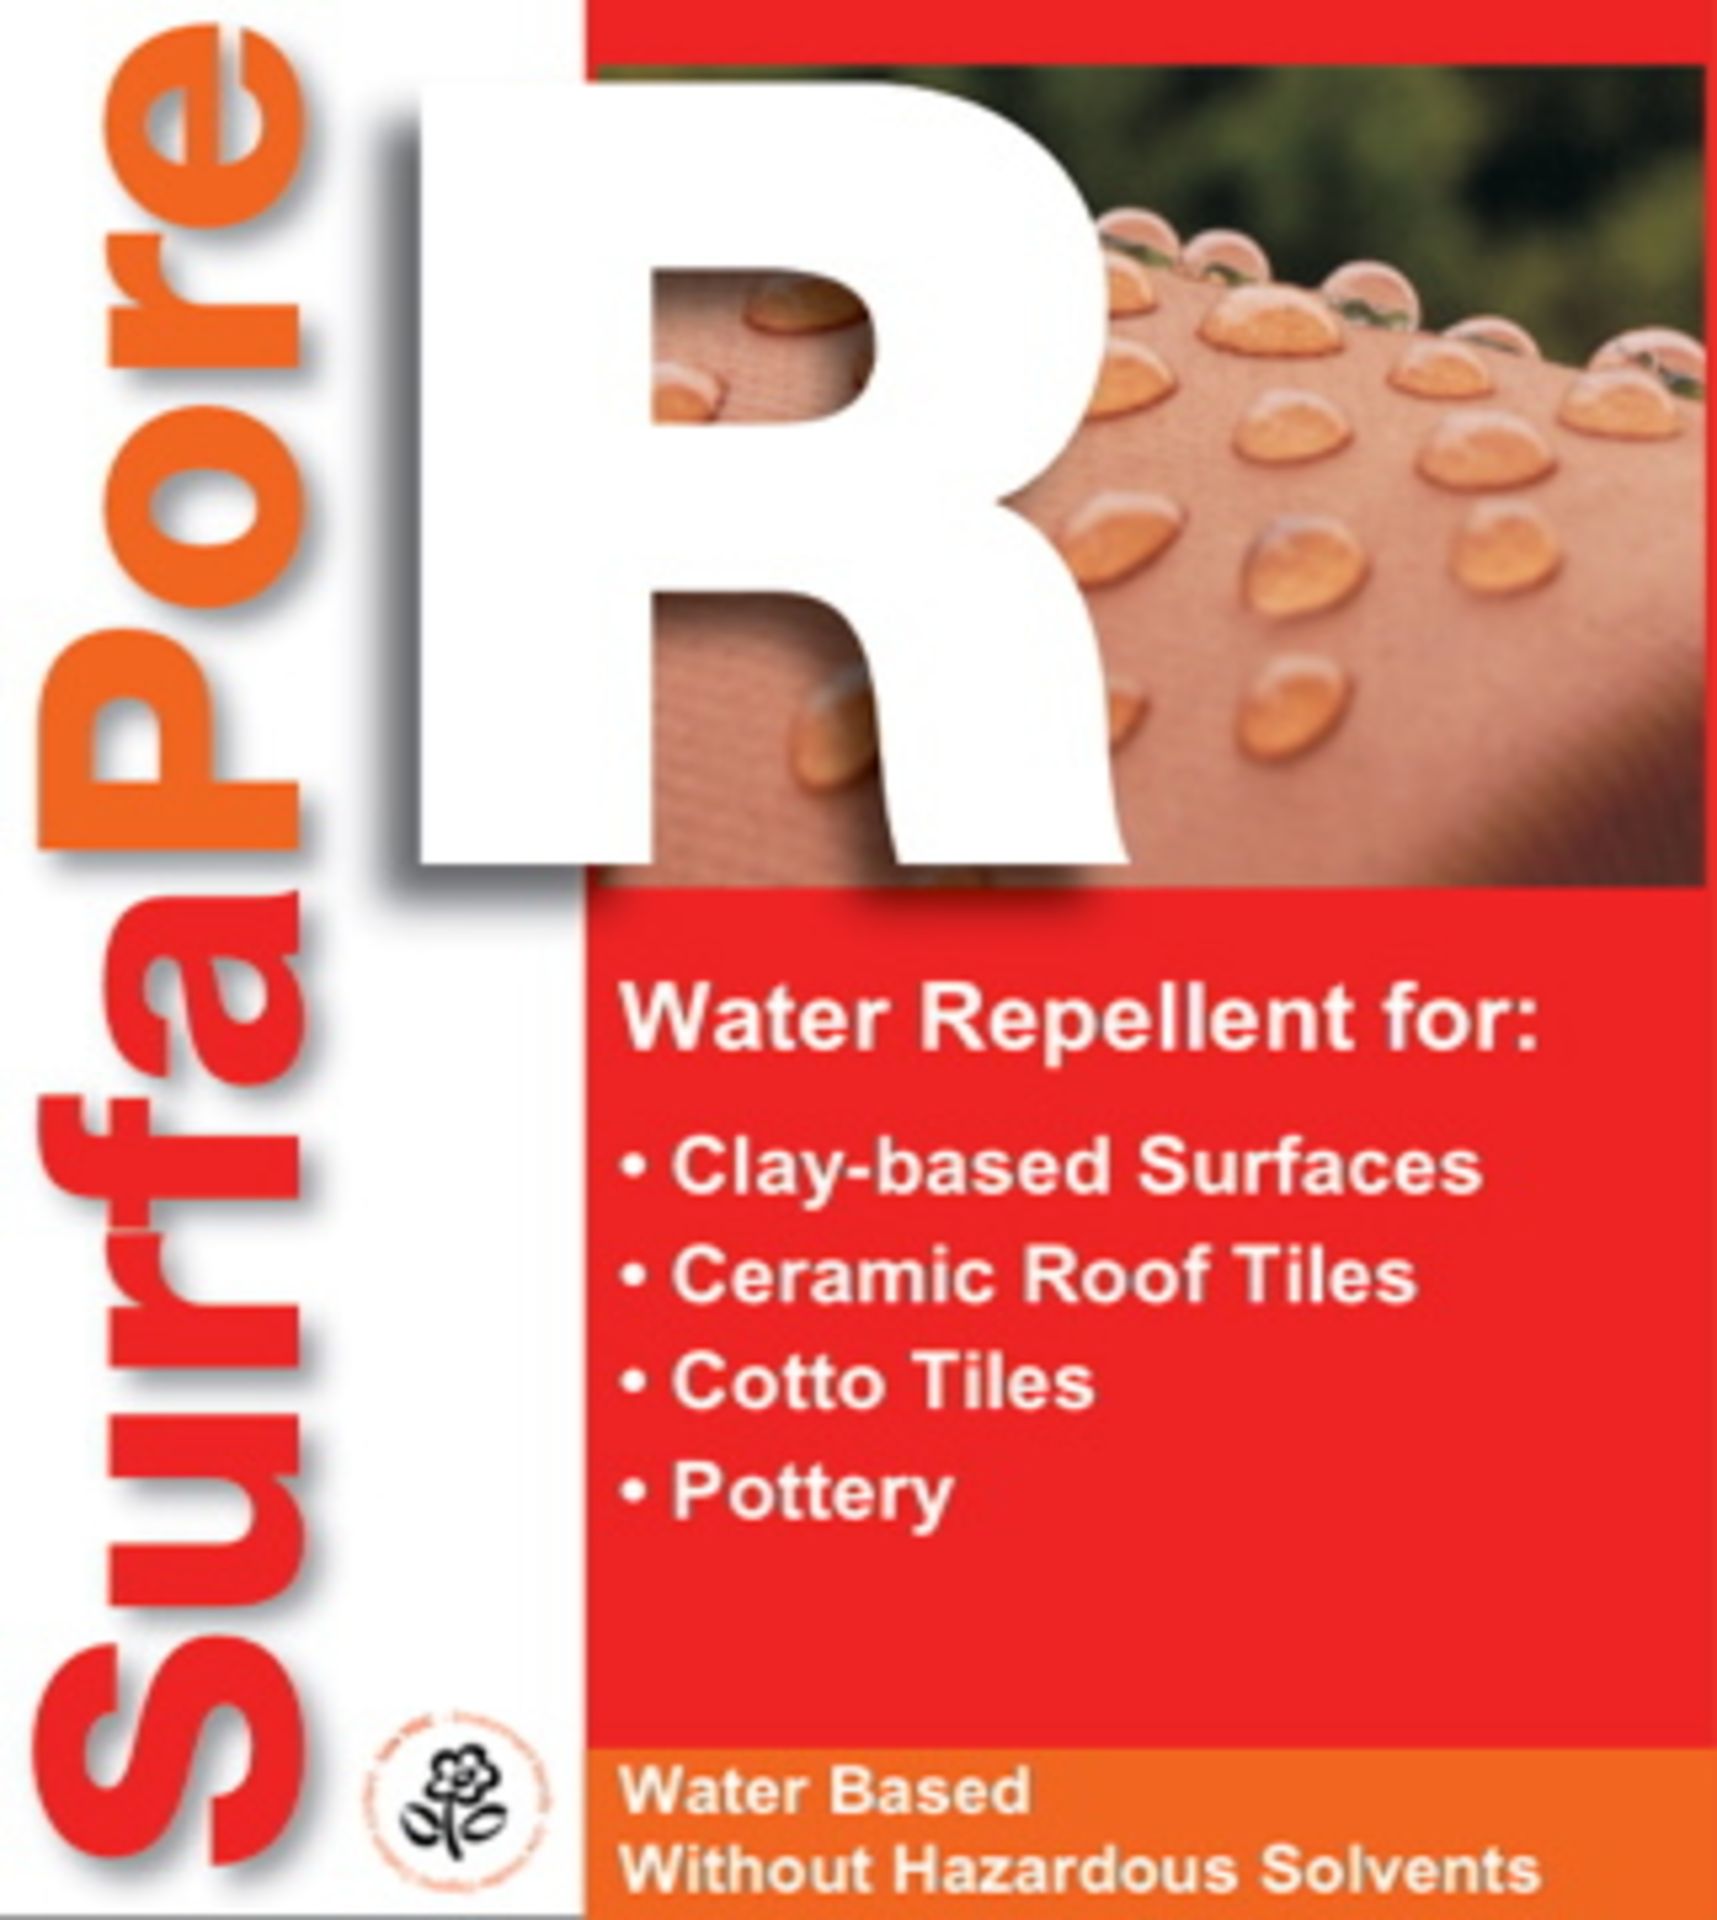 6 x Nanophos Surfapore R For All Things Clay - Designed to Protect Clay Bricks, Tiles, Pavers and - Image 3 of 5